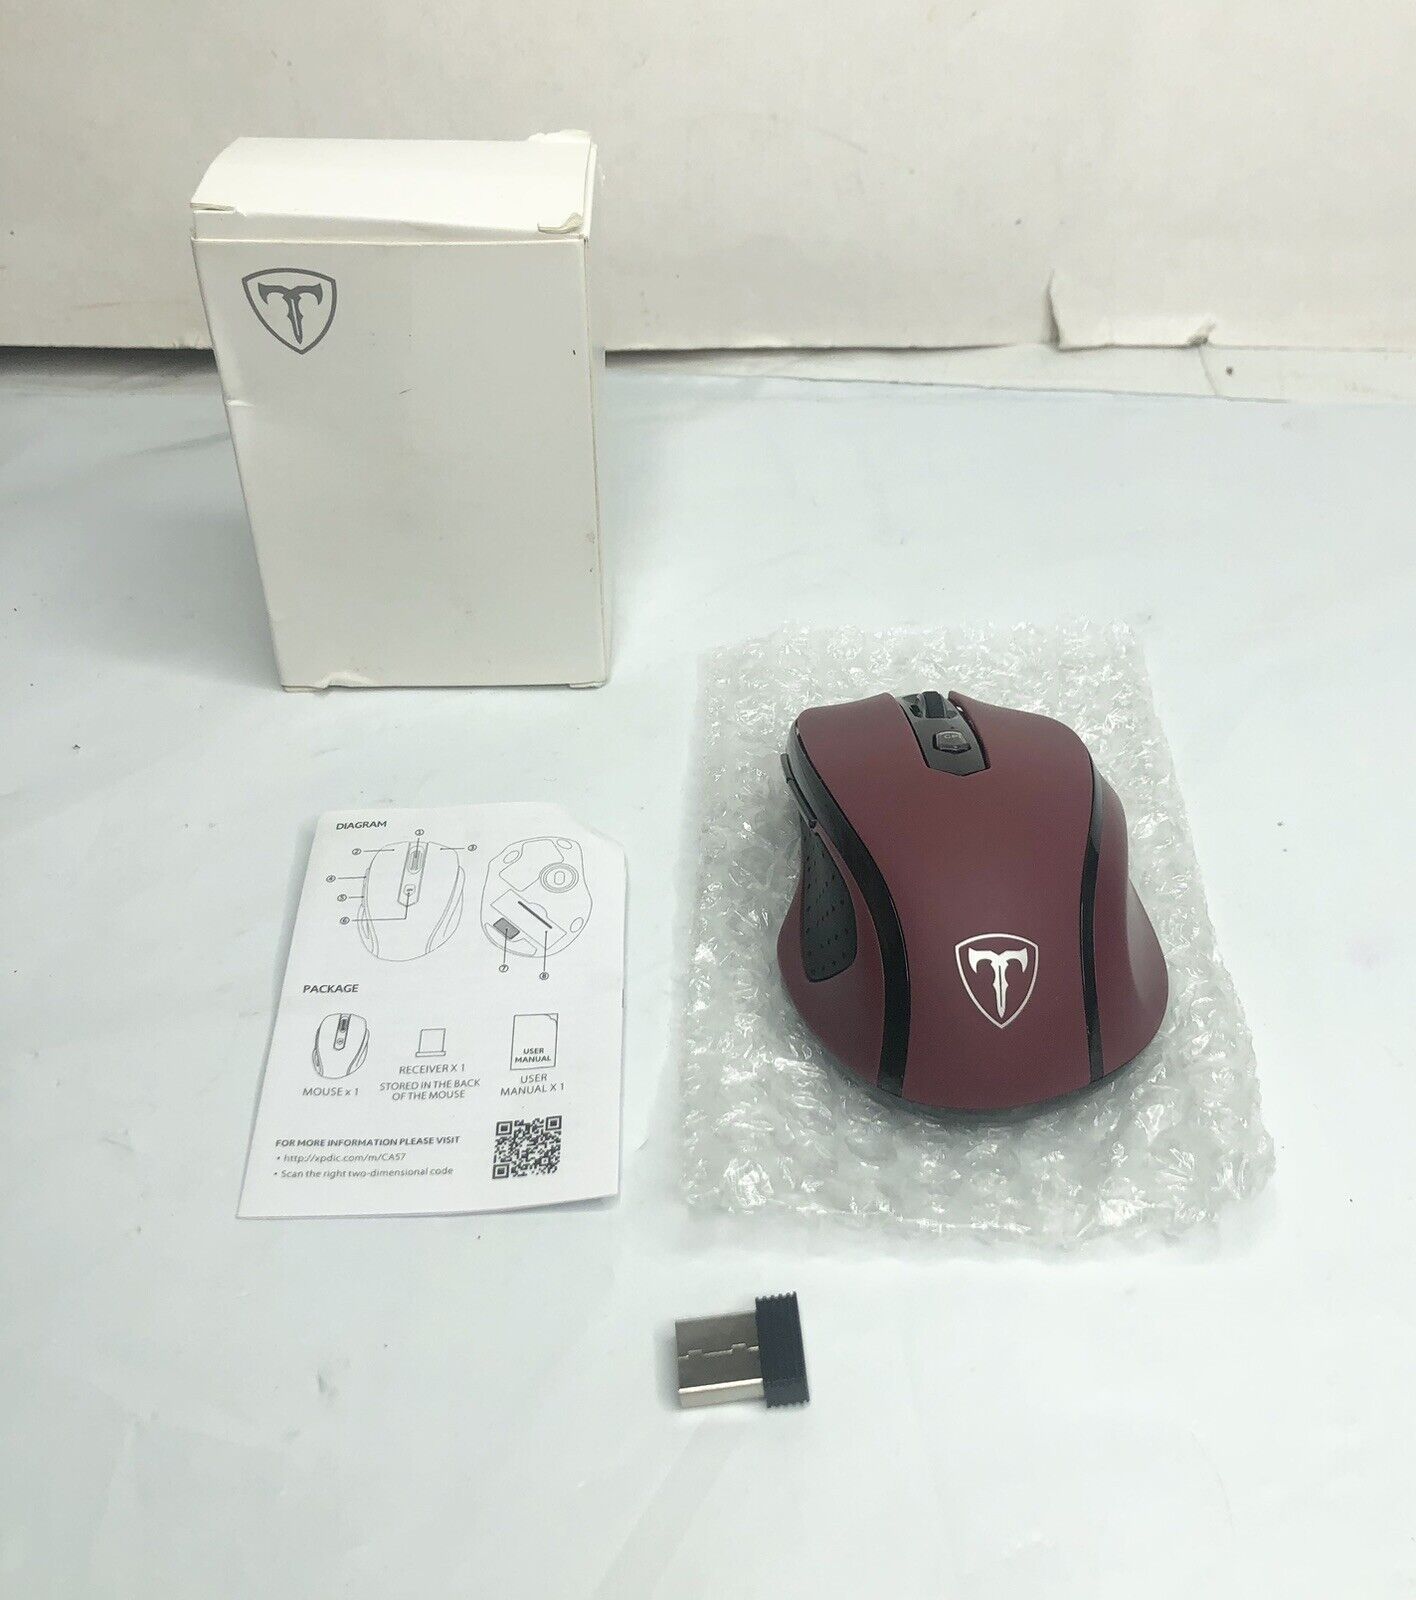 Wireless Gaming Mouse Range Compact Size Travel Portable Victsing D-09